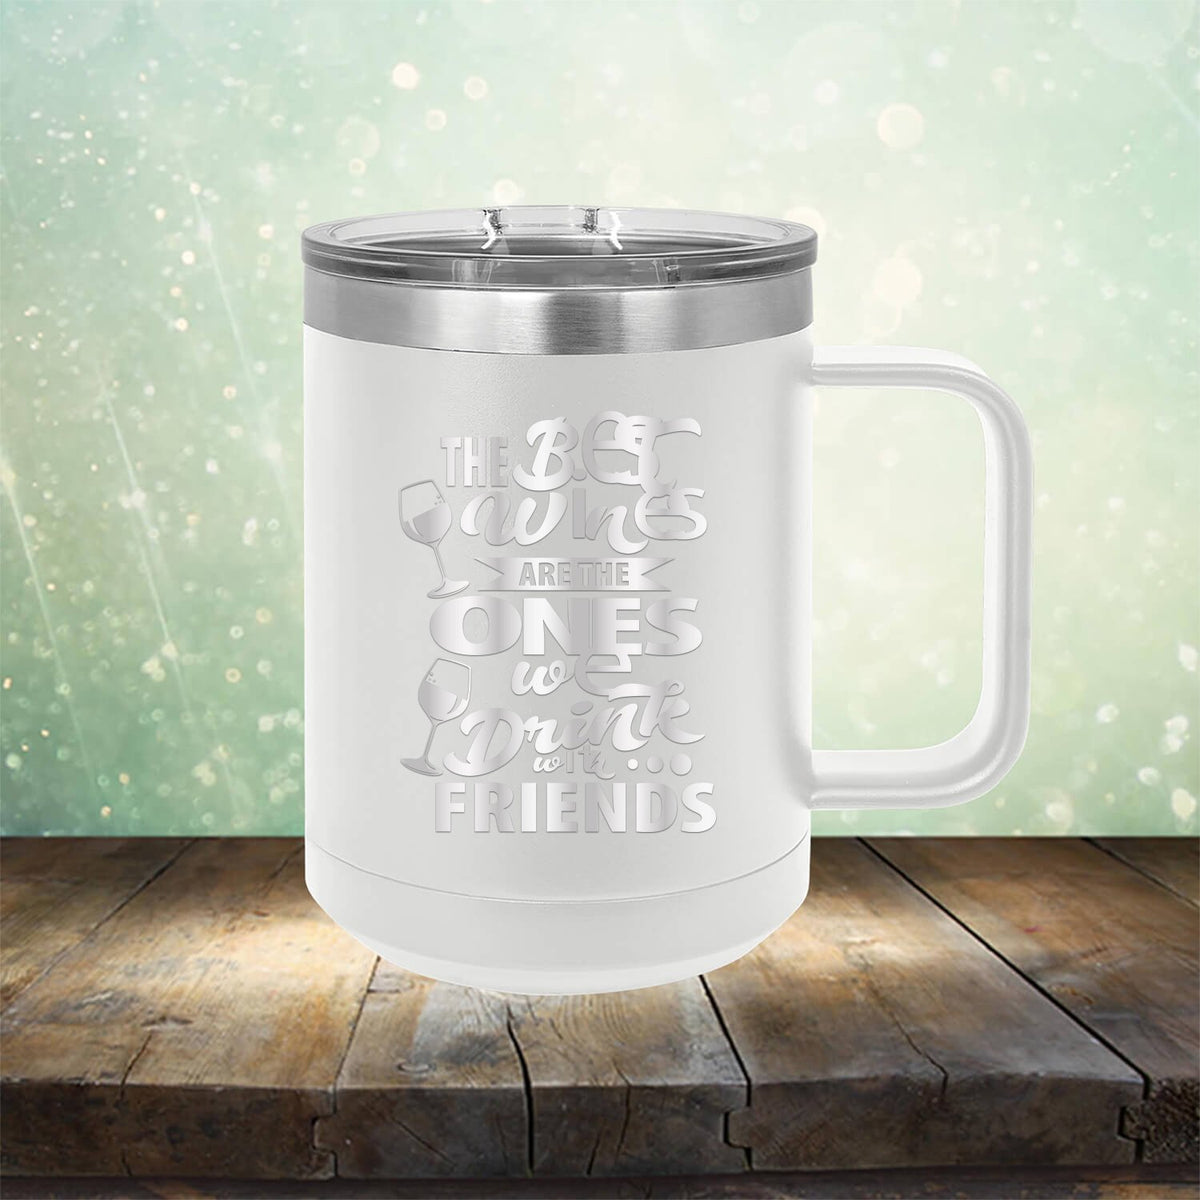 The Best Wines Are The Ones We Drink With Friends - Laser Etched Tumbler Mug